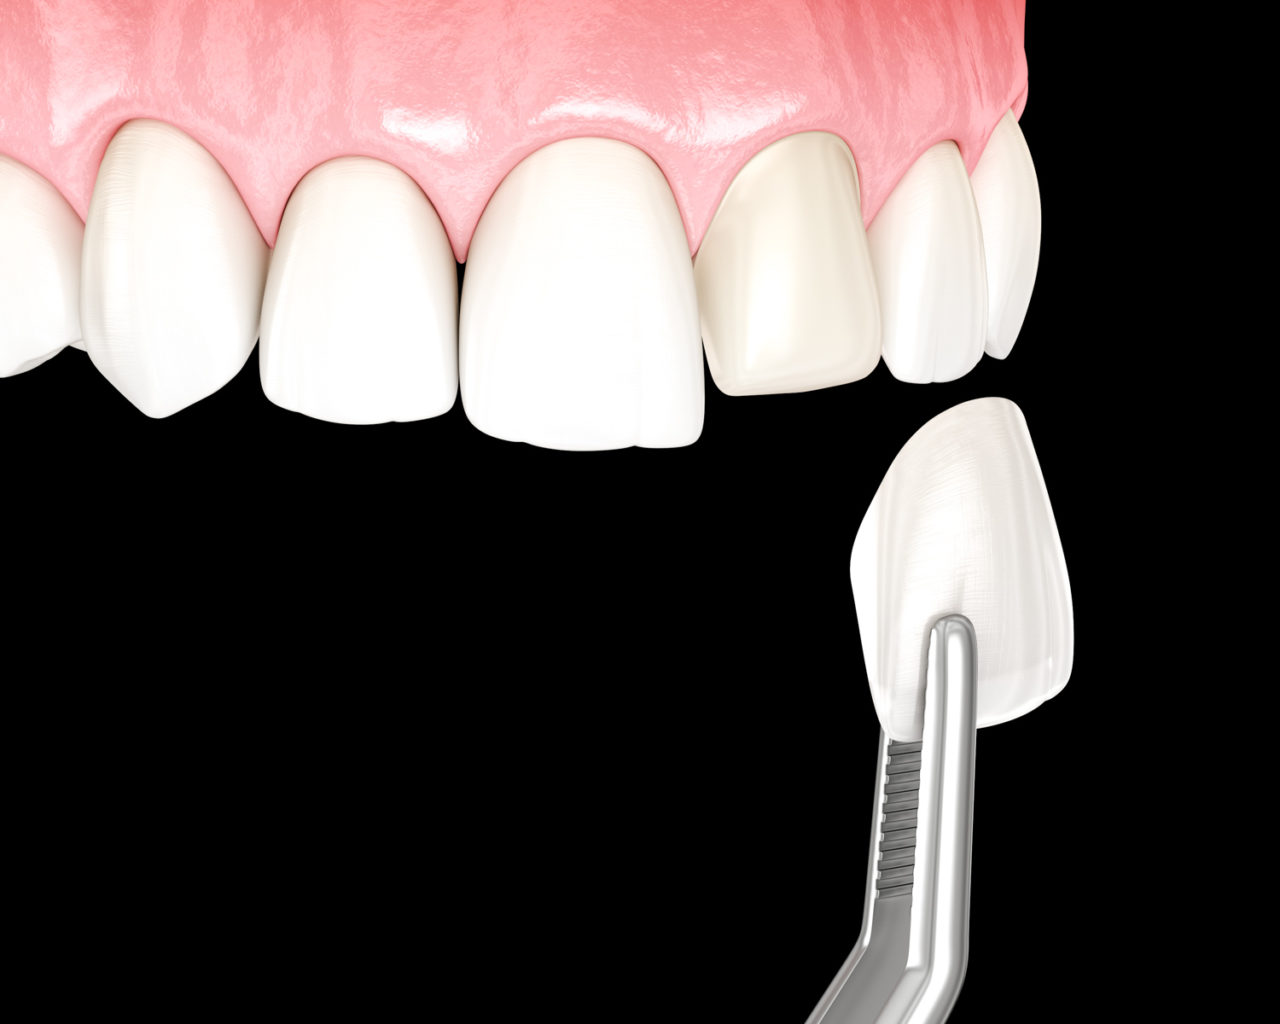 Veneer installation procedure over central incisor. Medically accurate tooth 3D illustration